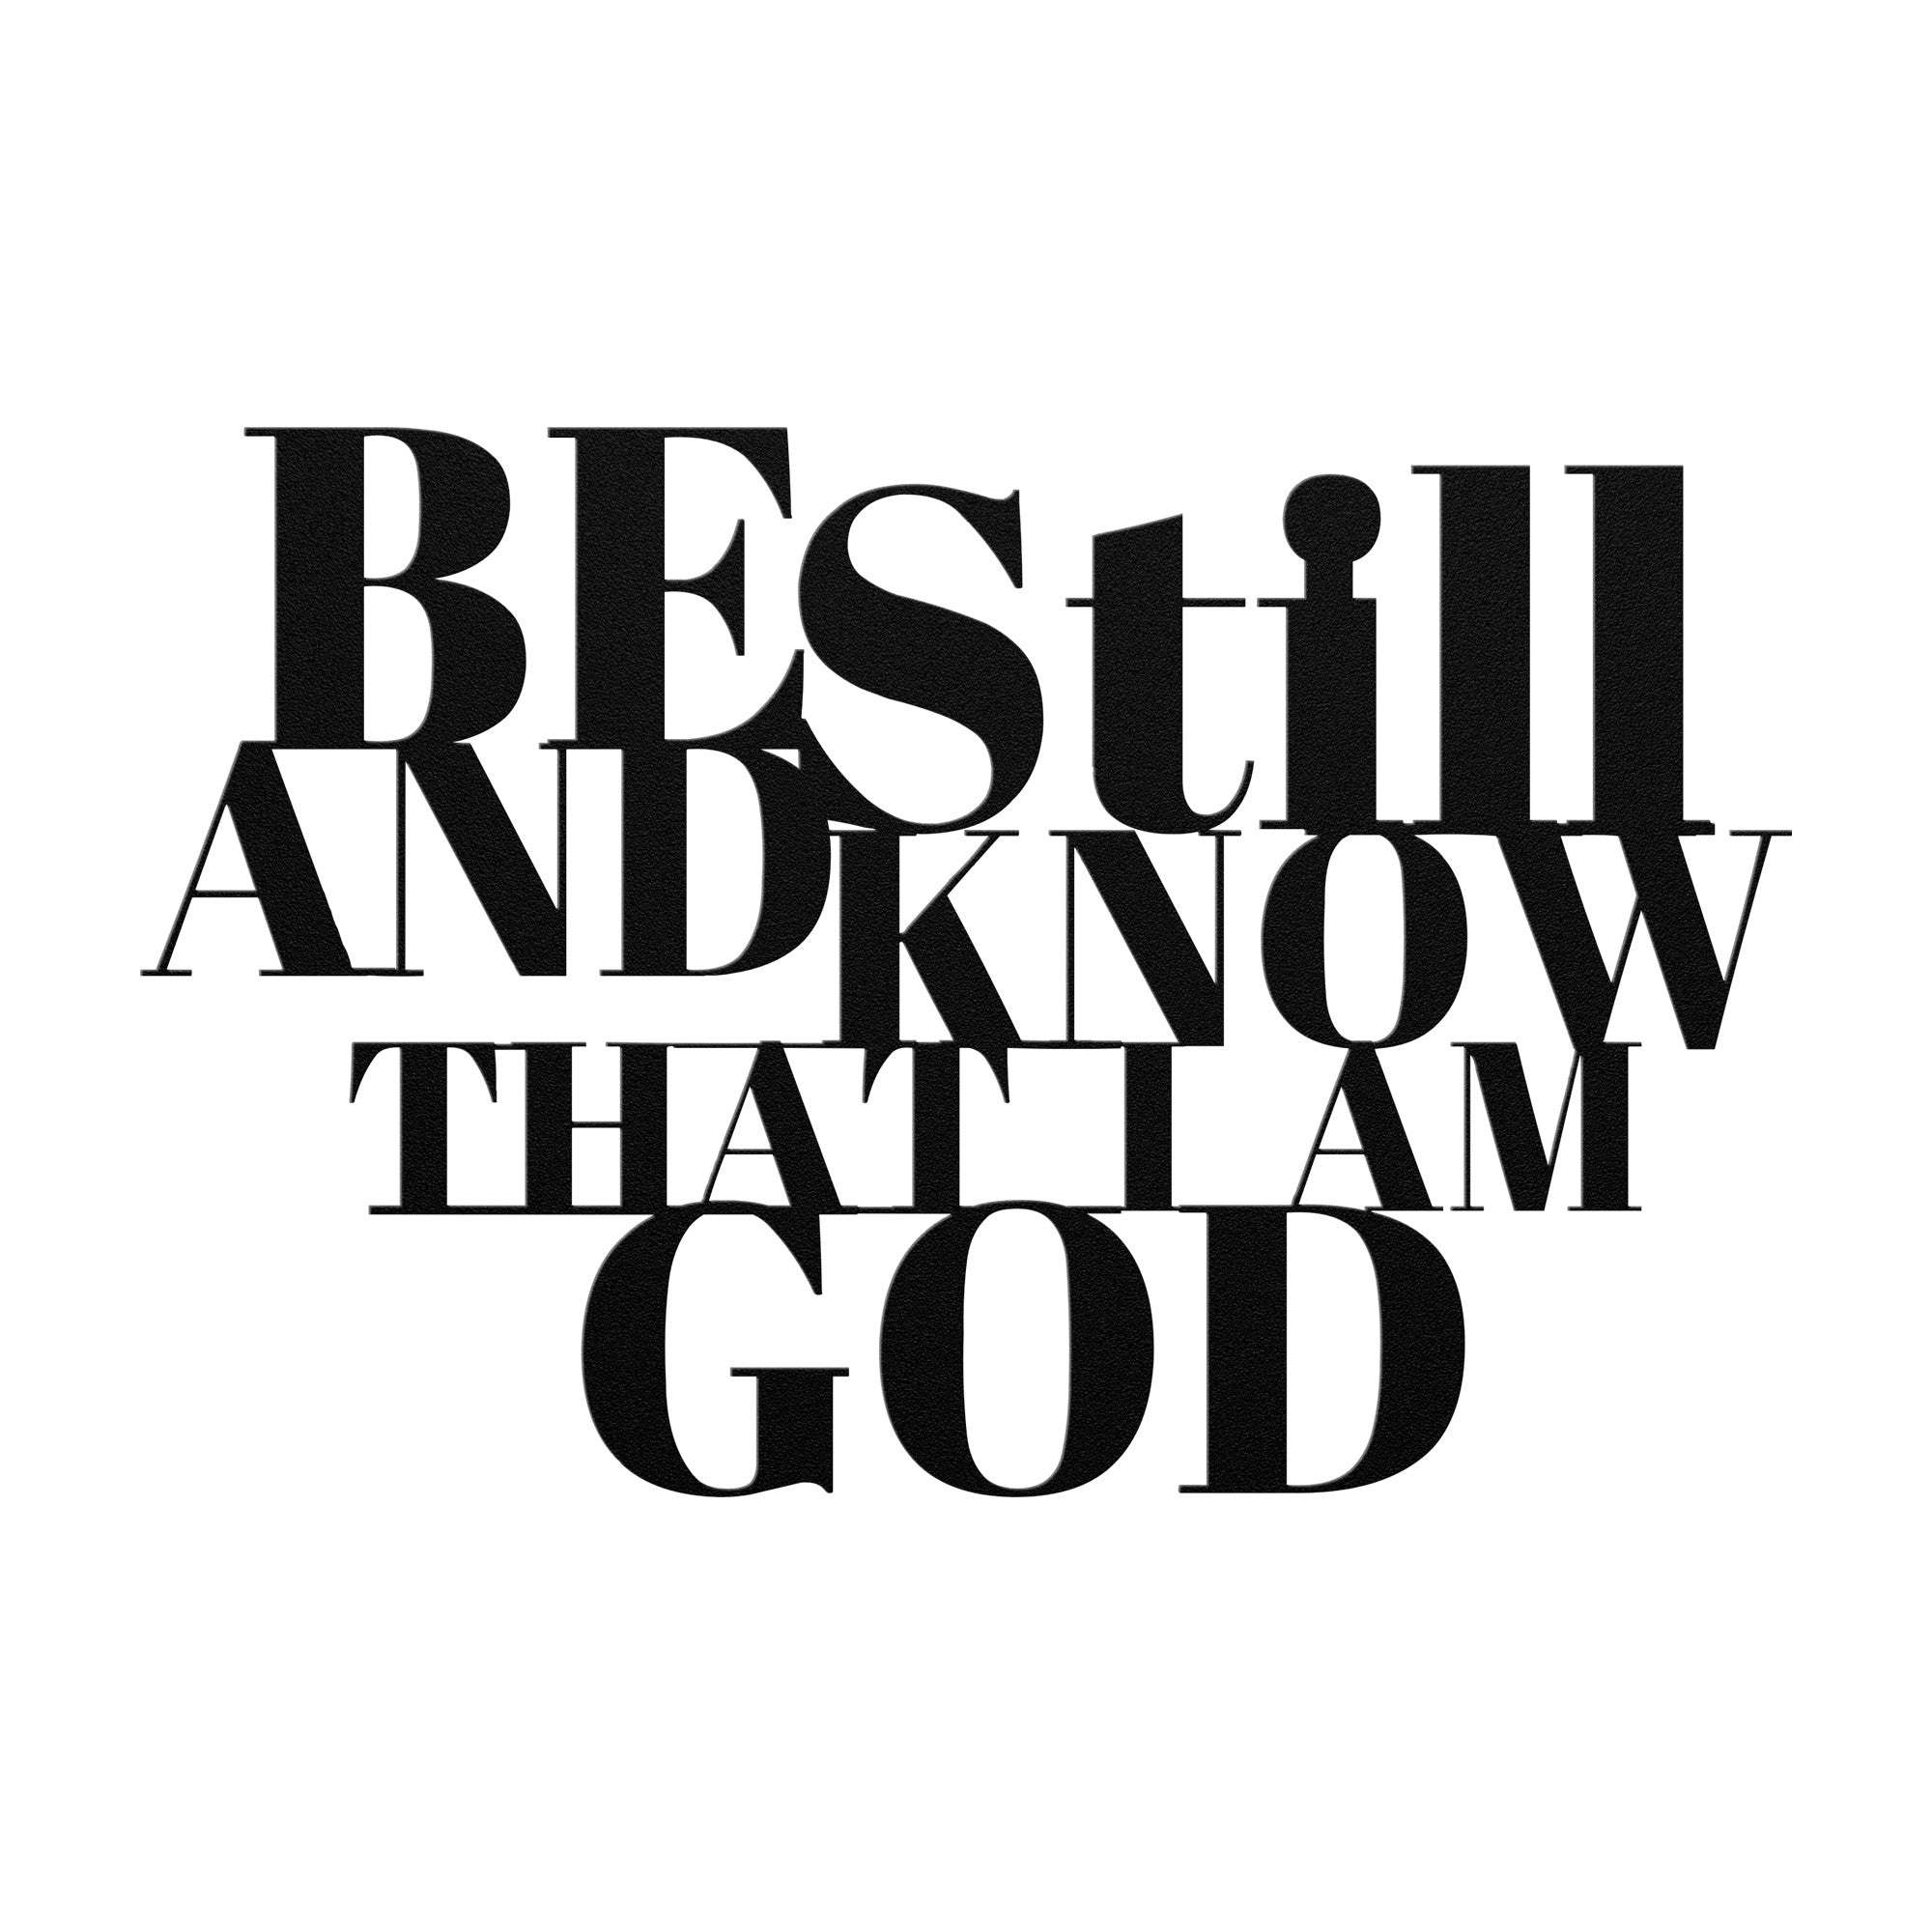 Be still and know that I am God - Metal Wall Art